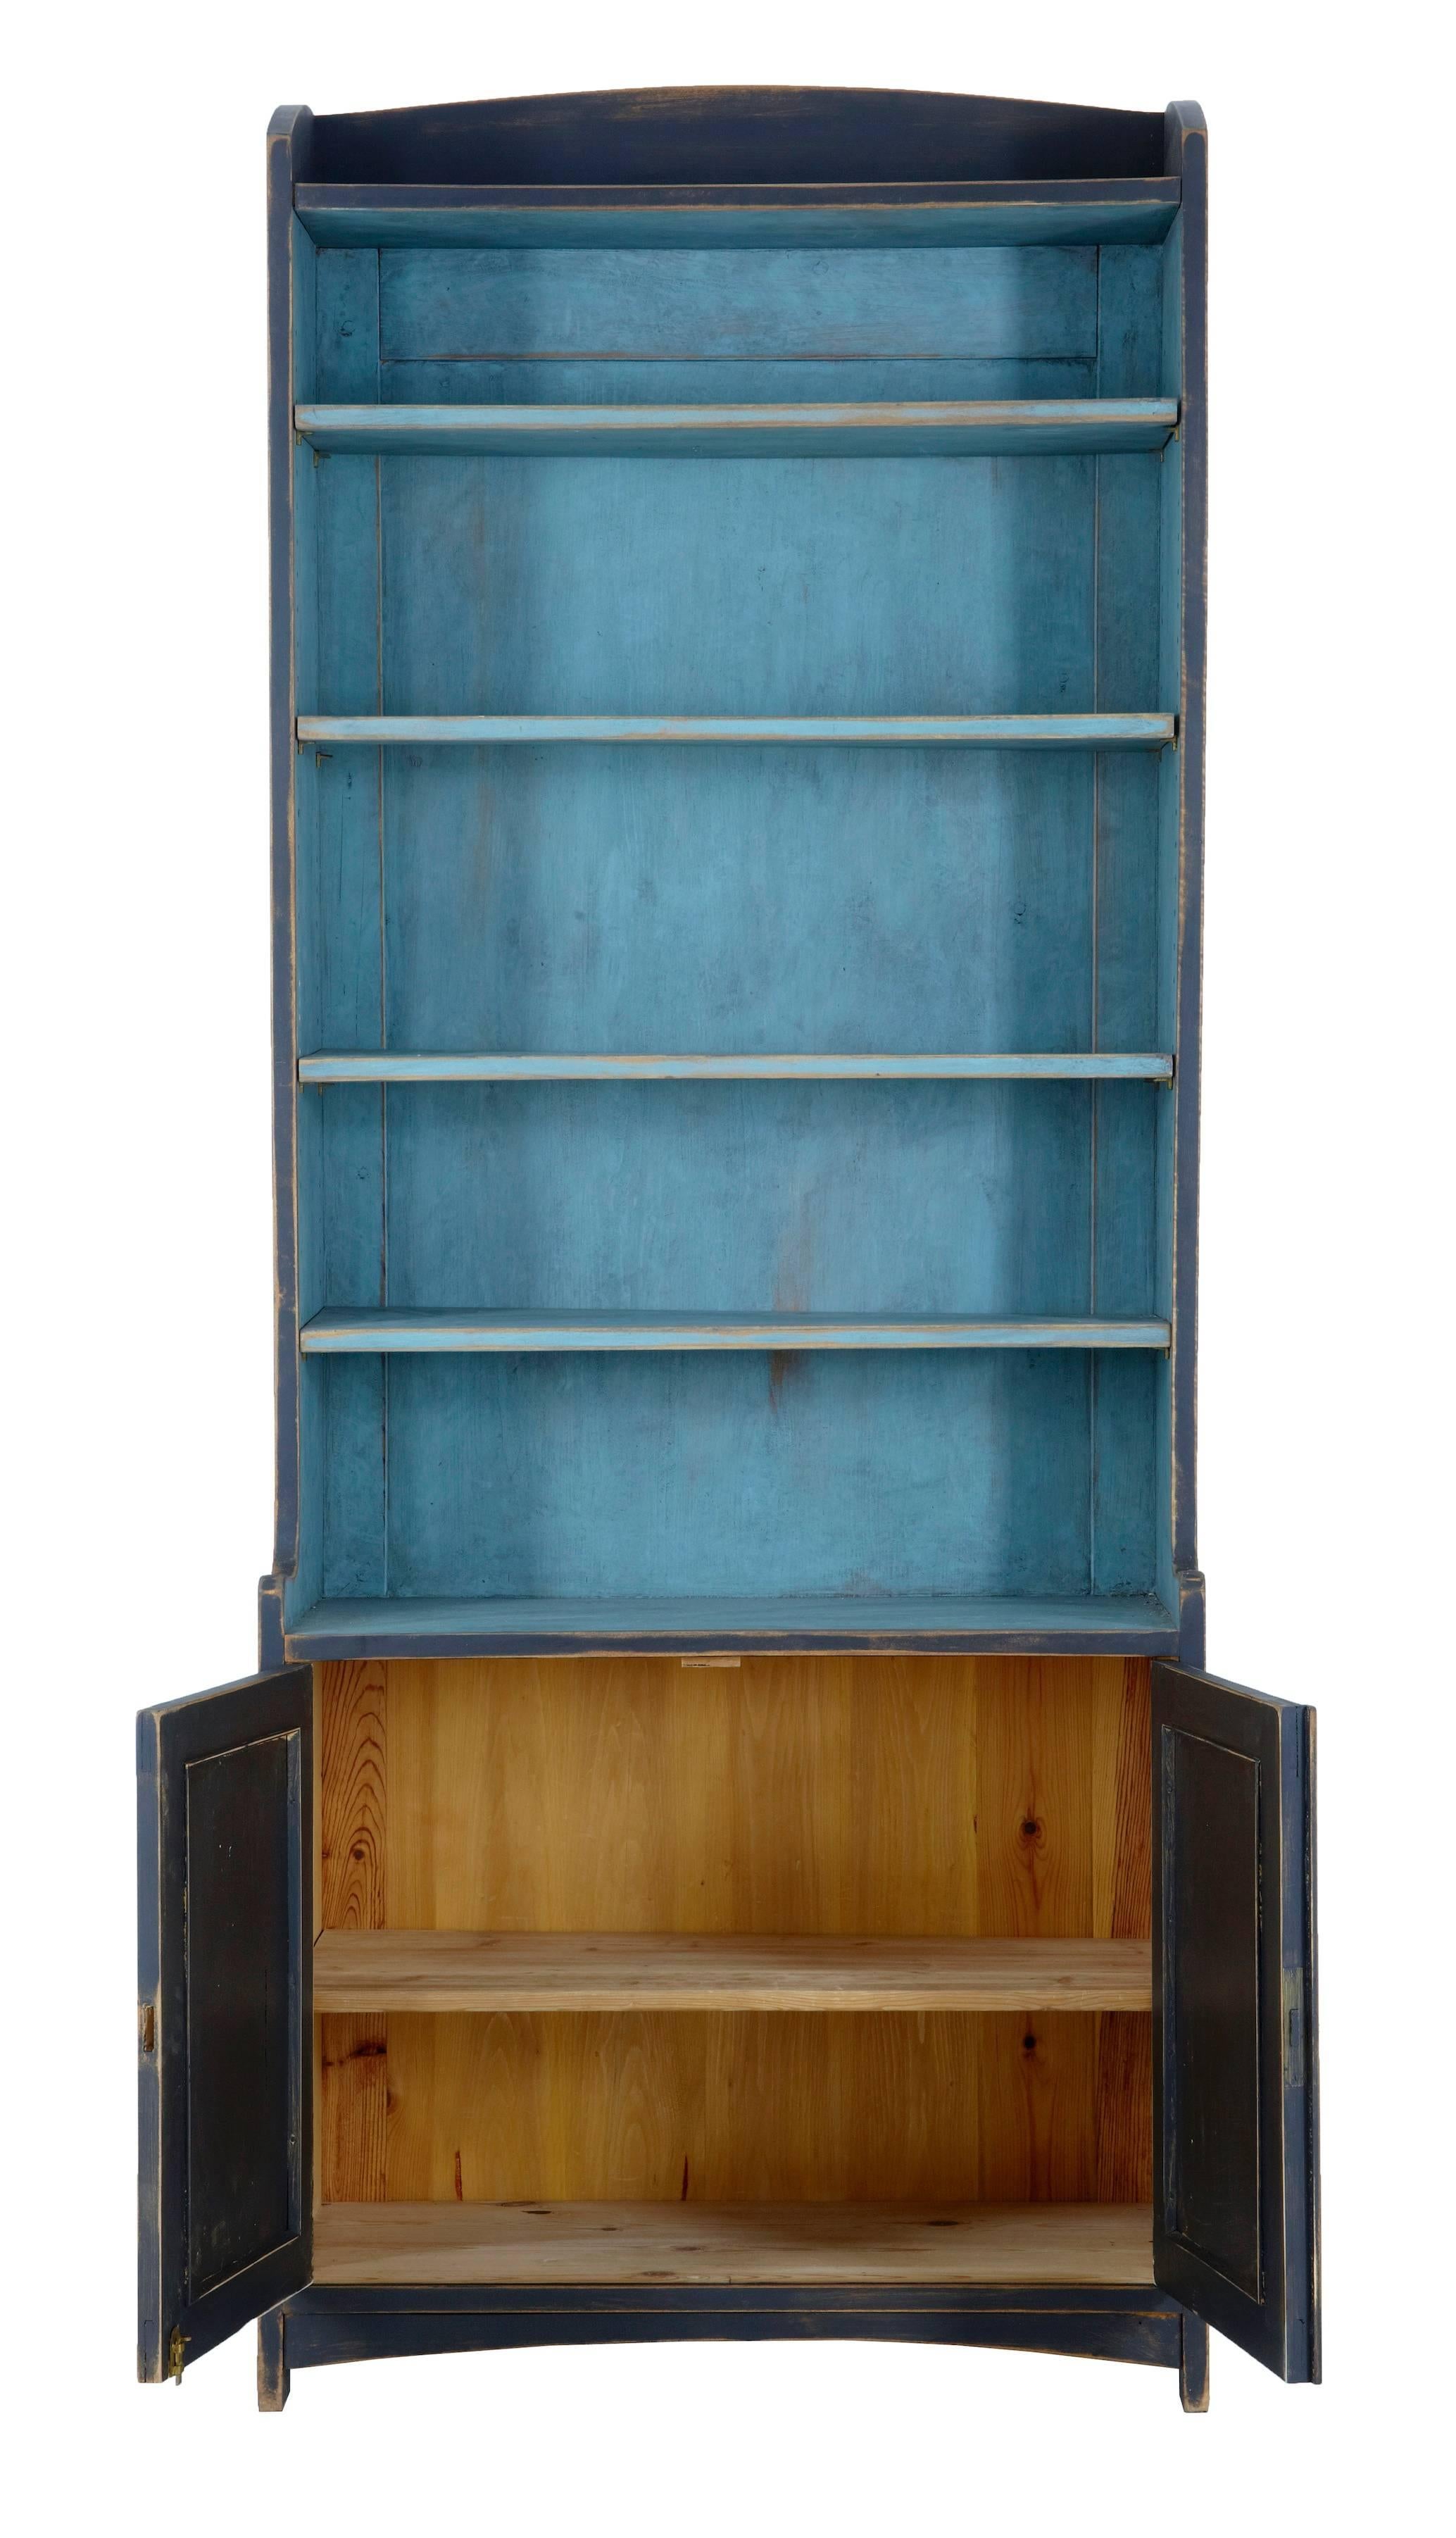 One piece Swedish bookcase cupboard, circa 1880.
Beautifully decorated in later paint, charcoal grey with contrasting blue shelves.
Double door cupboard opens to reveal bare pine interior.

Measures: Height: 77